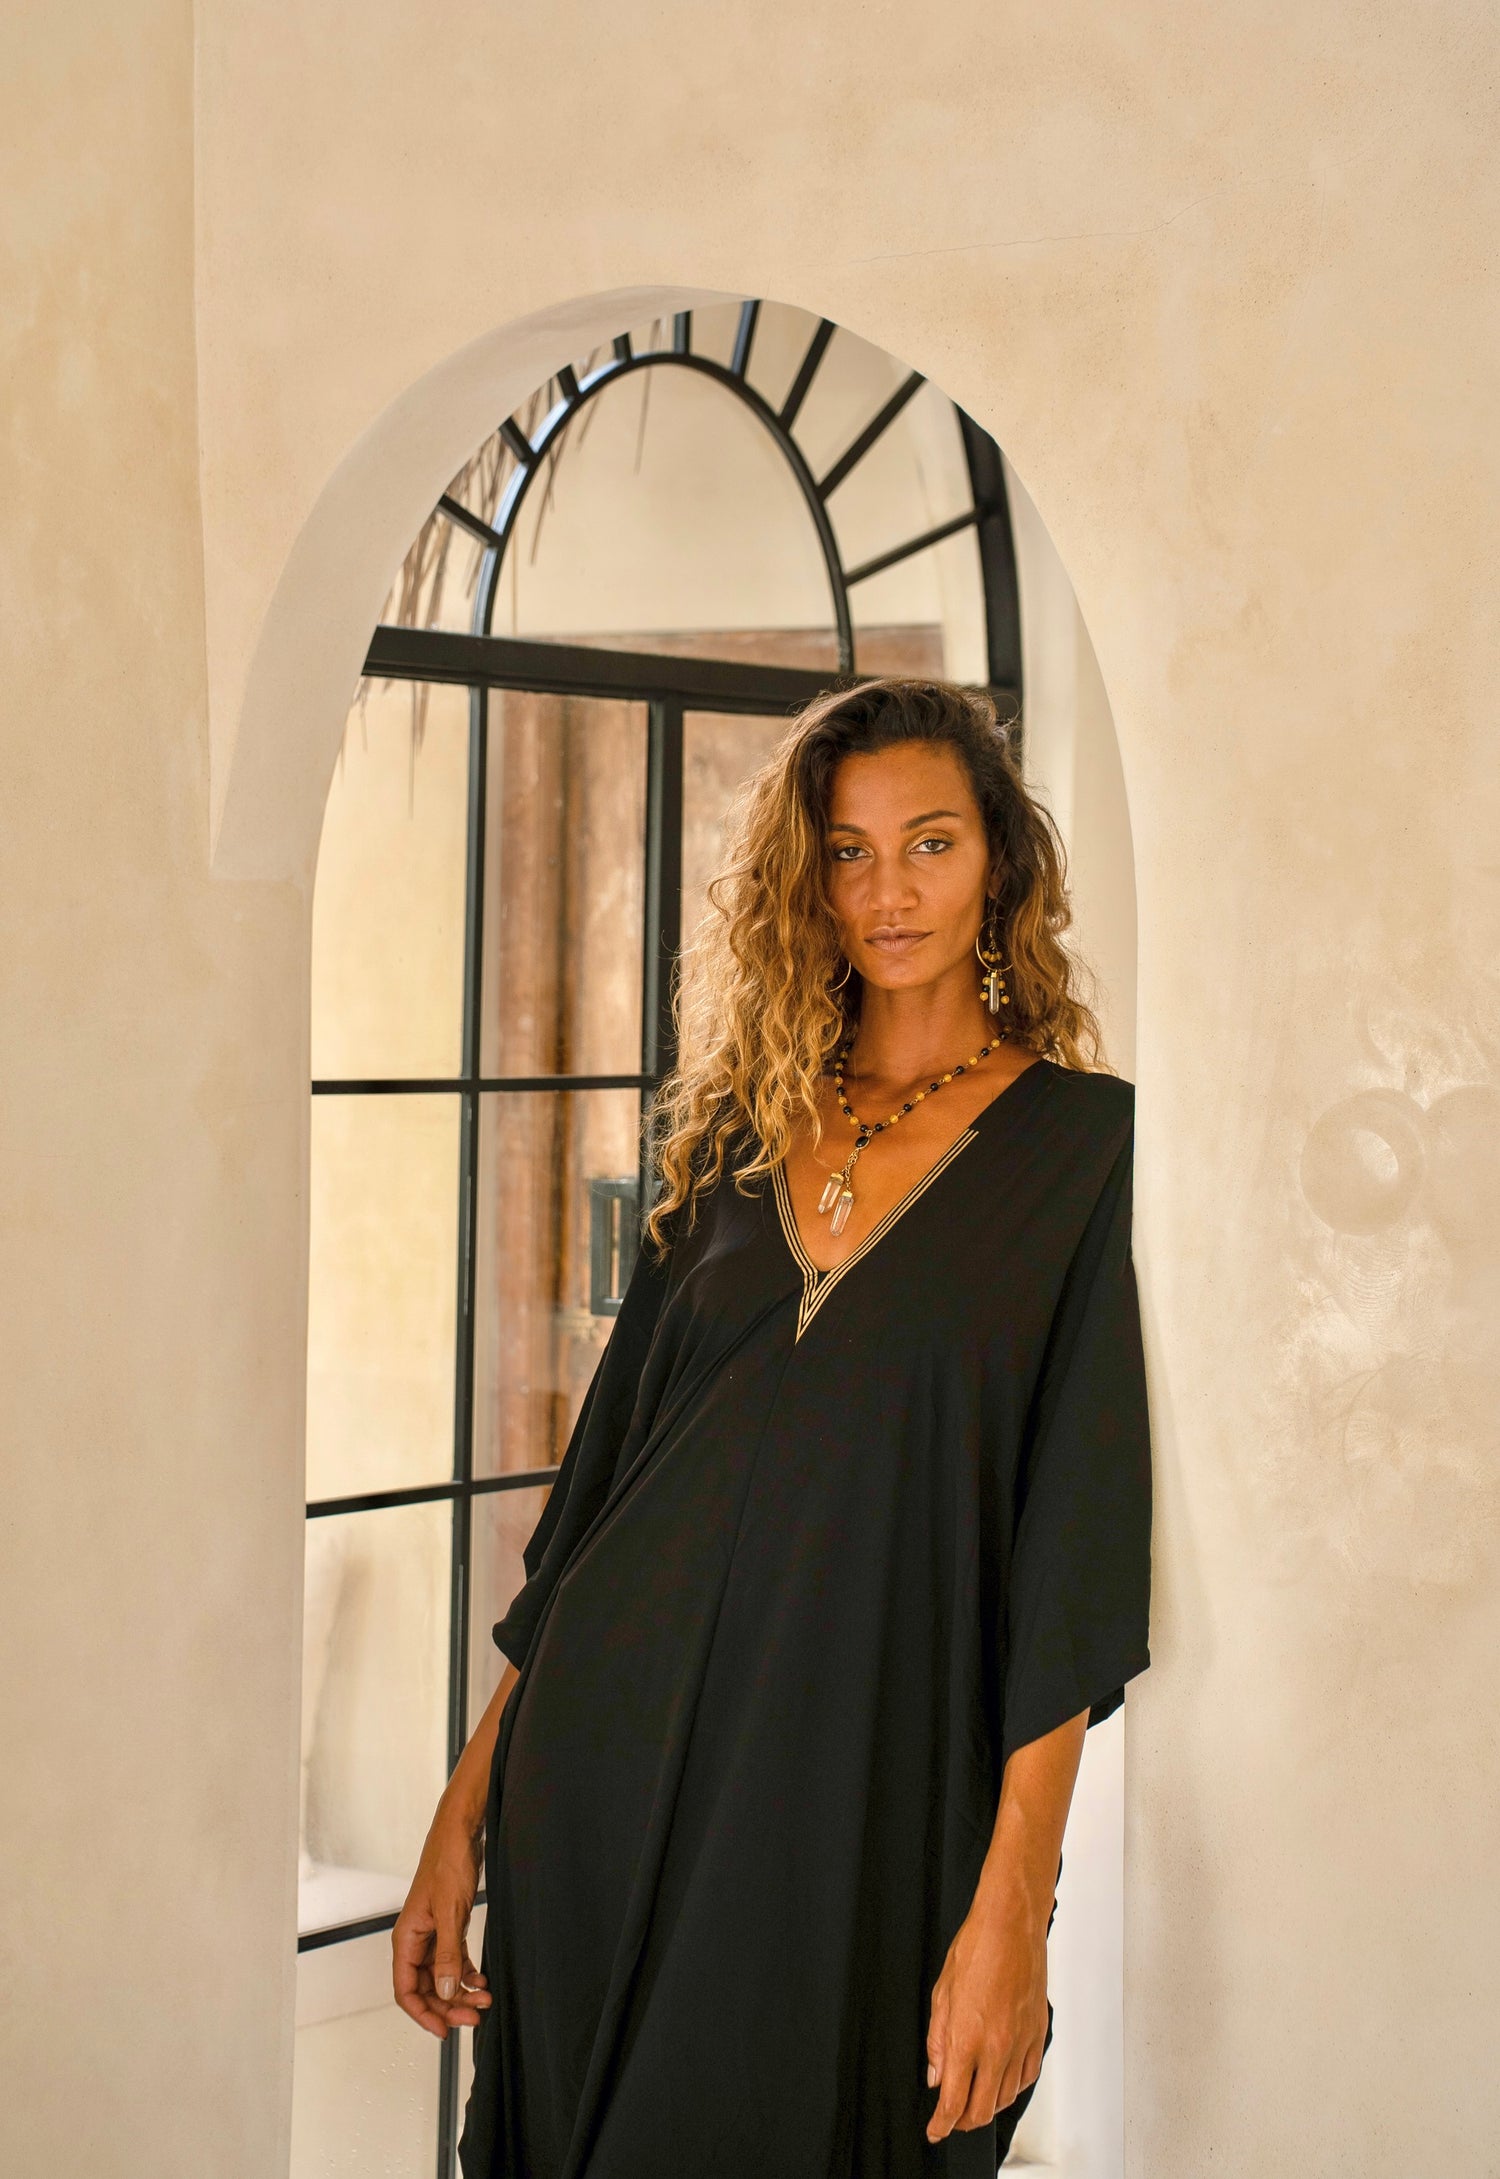 Ritual Kaftan black and Gold with crystal me necklace and ring me earring from unleash your inner wealth